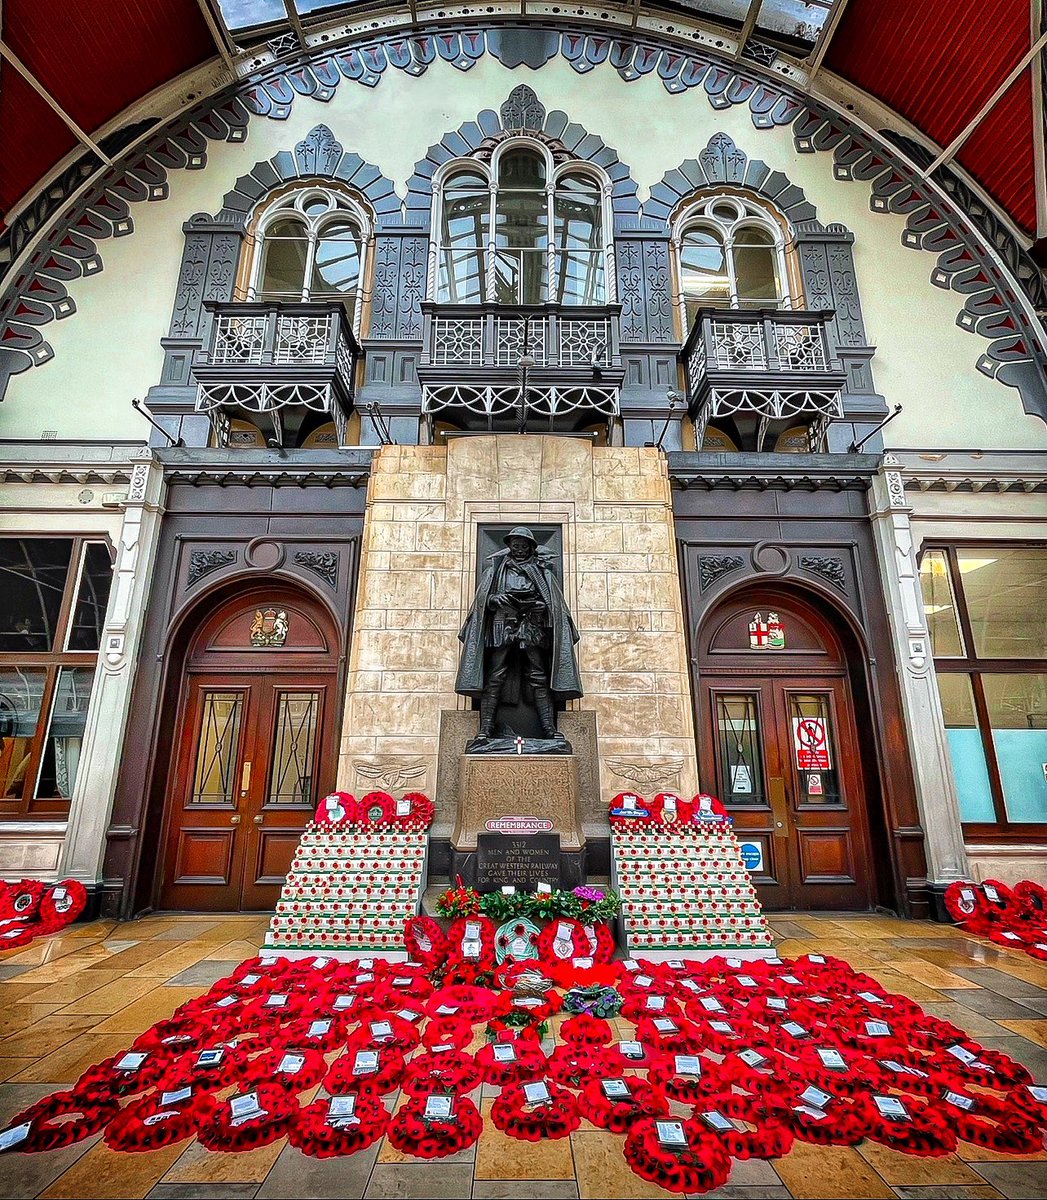 “ There'll be bluebirds over, The white cliffs of Dover, Tomorrow, just you wait and see. There'll be love and laughter
And peace ever after, Tomorrow, when the world is free…”

📍Paddington #Railway Station, #London

#RememberanceDay #PoppyAppeal #RoyalBritishLegion #photo